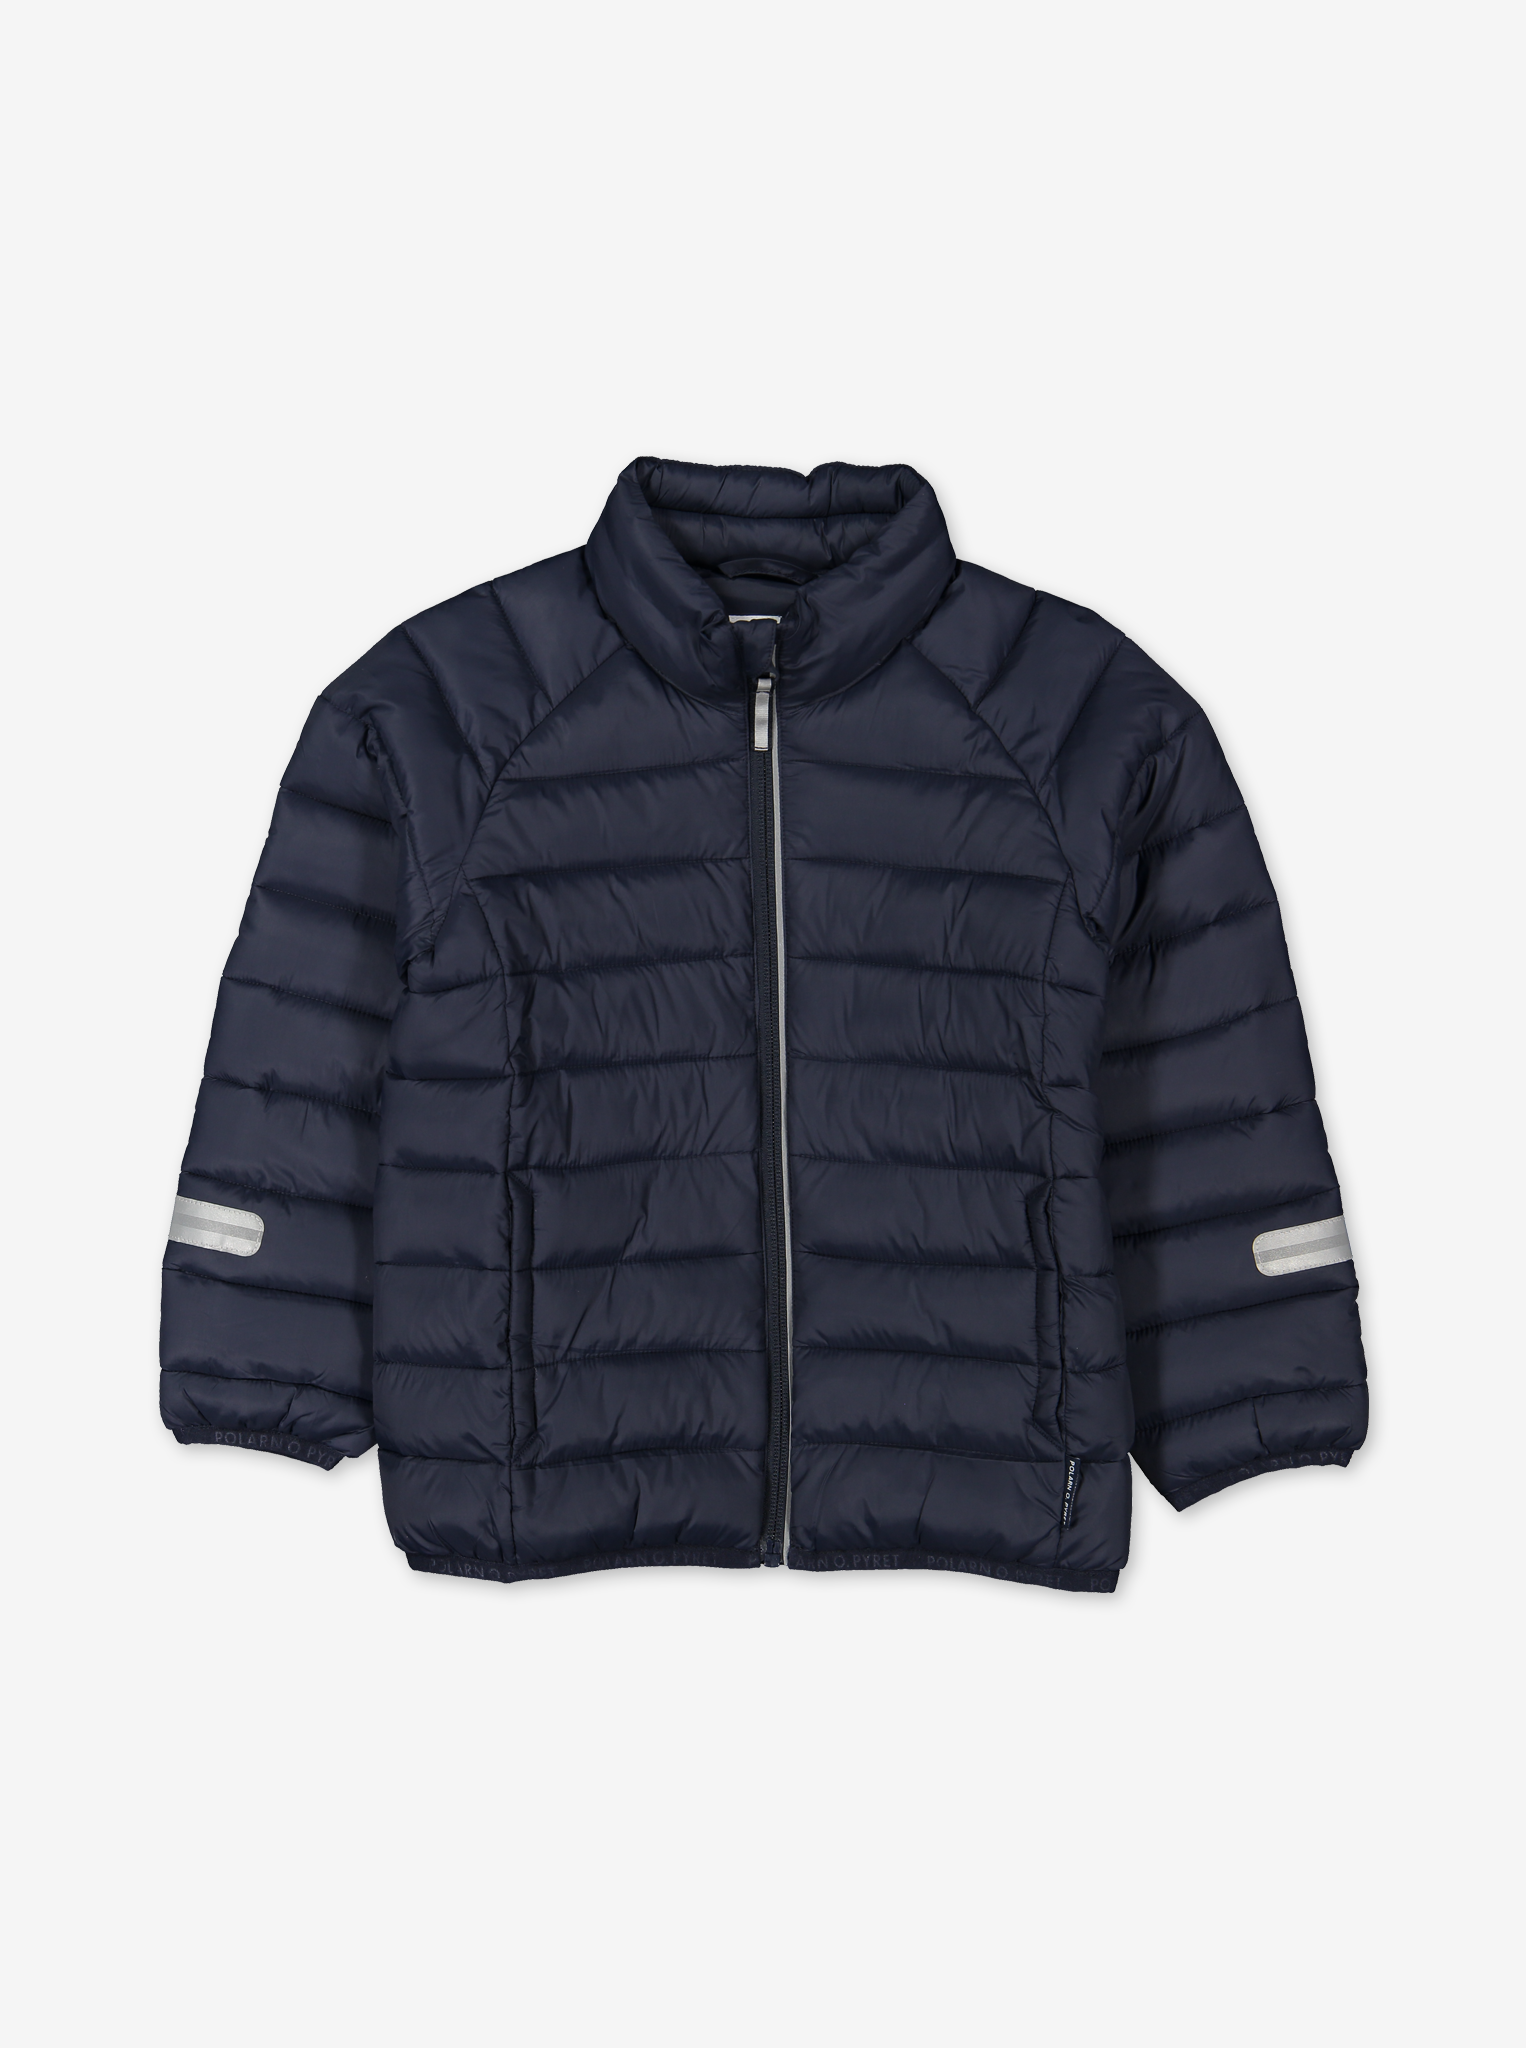 water resistant navy kids puffer jacket, recycled materials, warm and comfortable, ethical long lasting polarn o. pyret